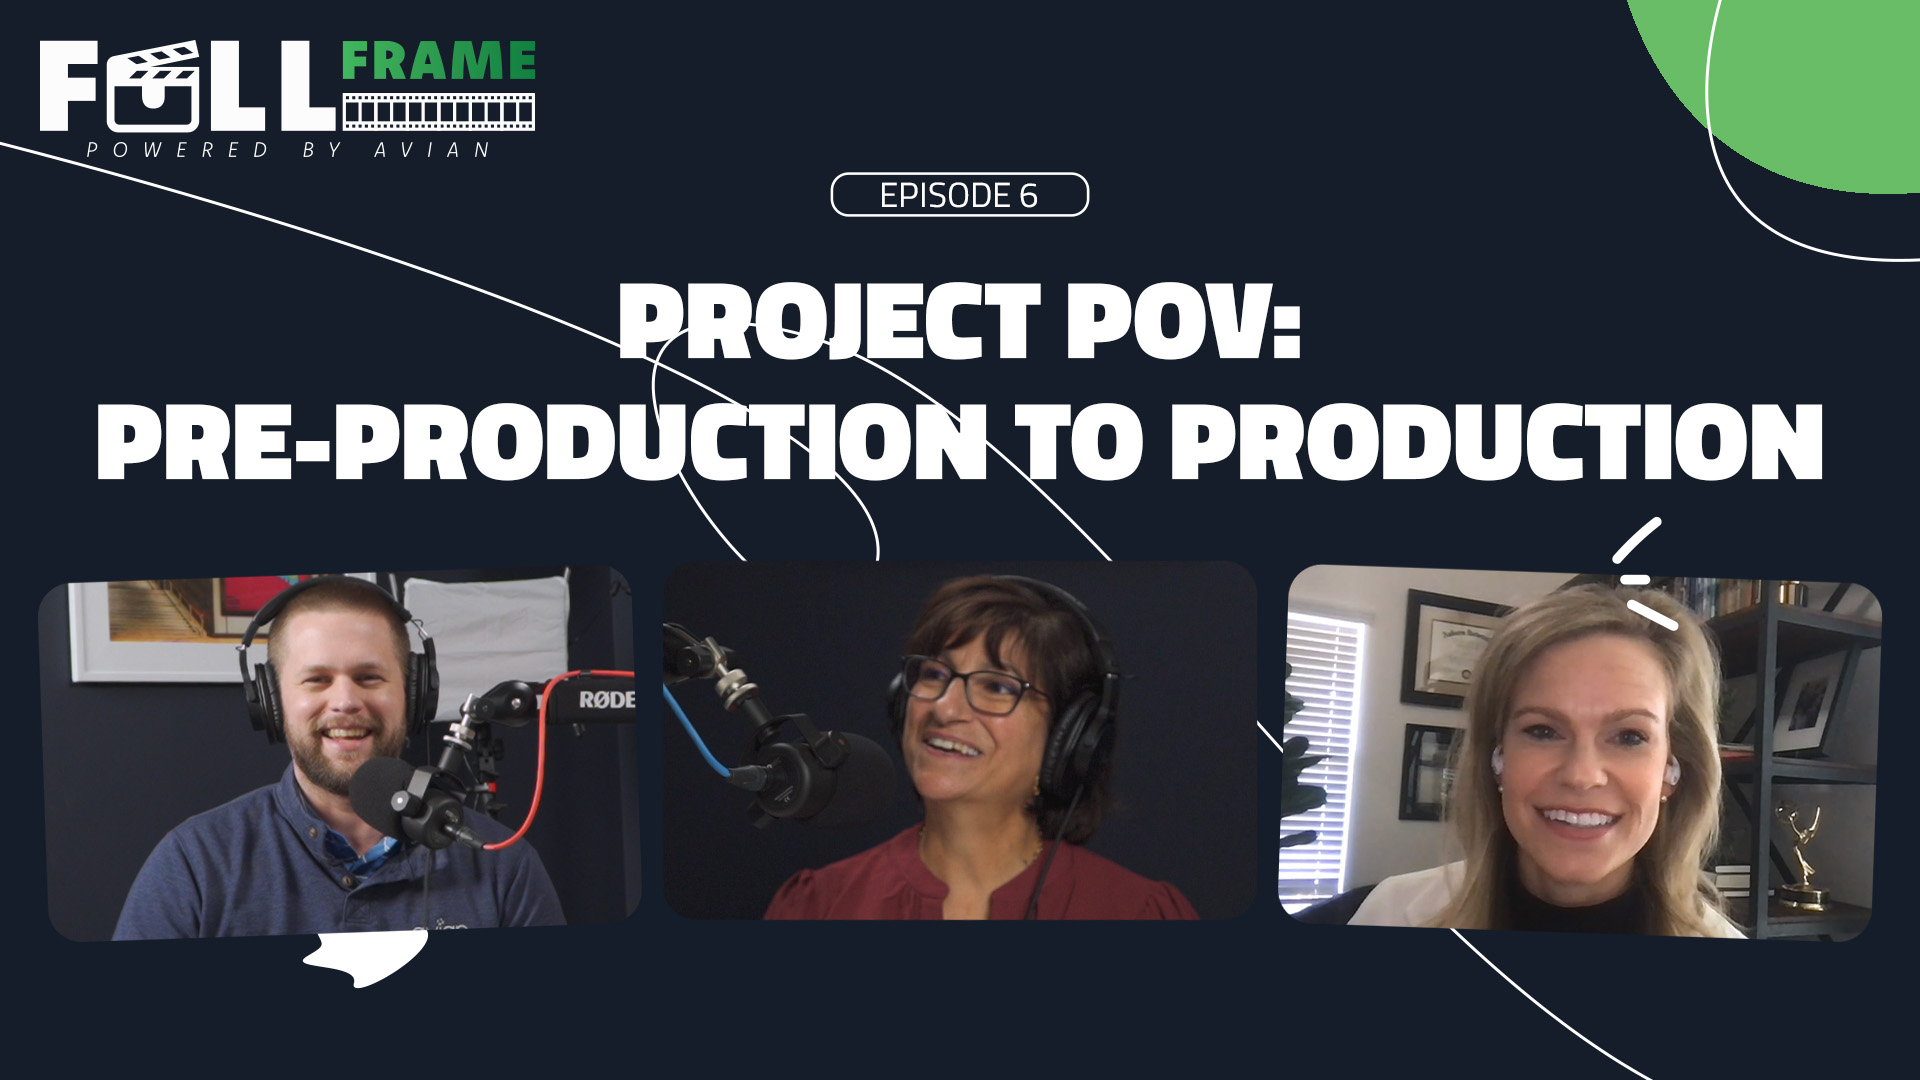 Project POV: pre-production to production